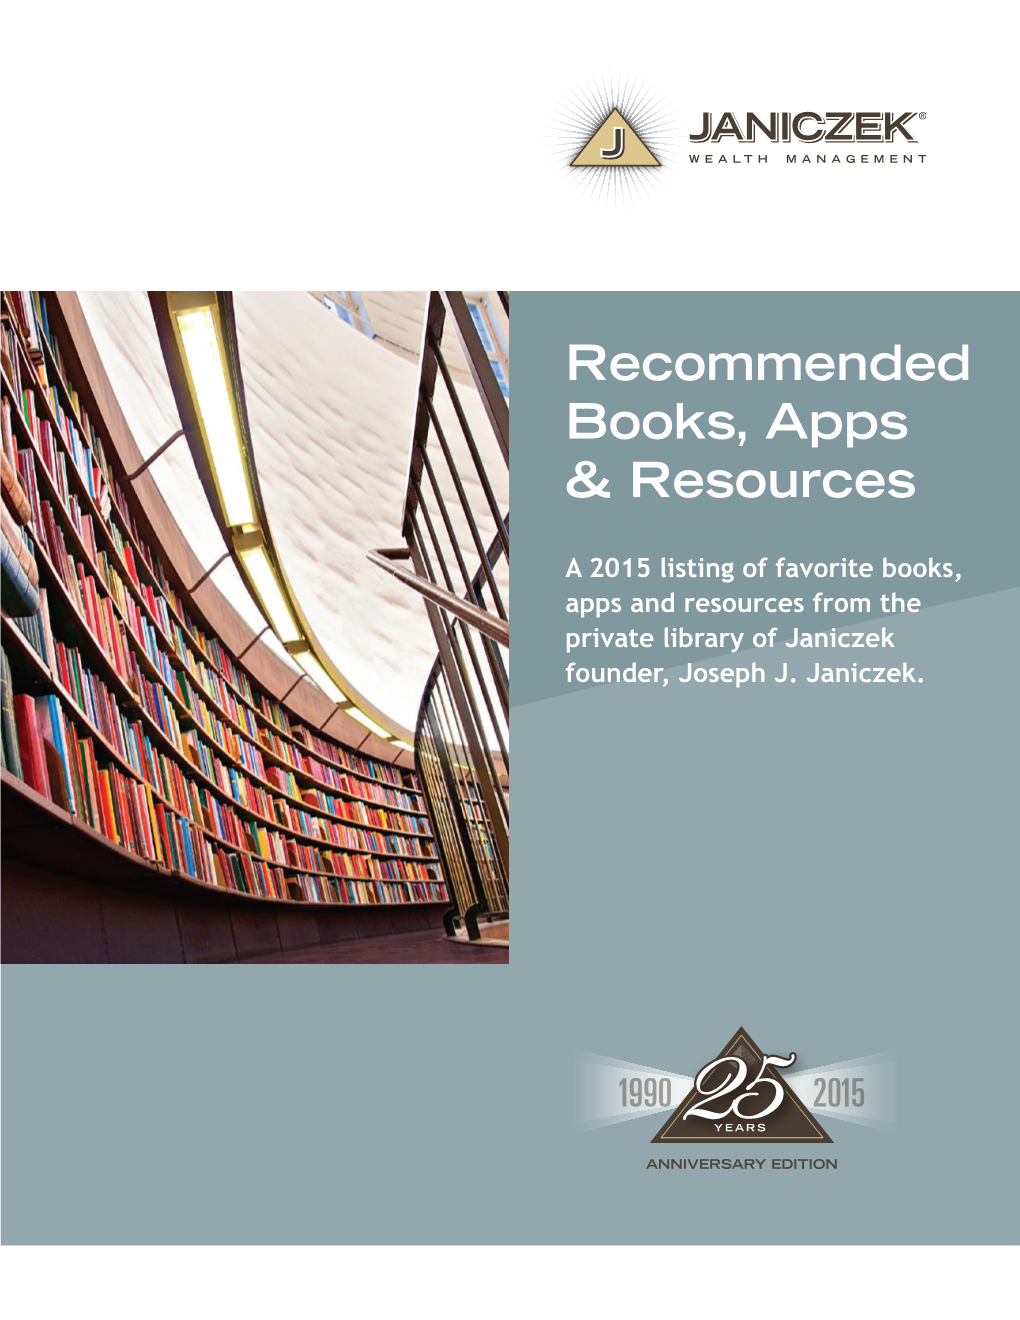 Recommended Books, Apps & Resources